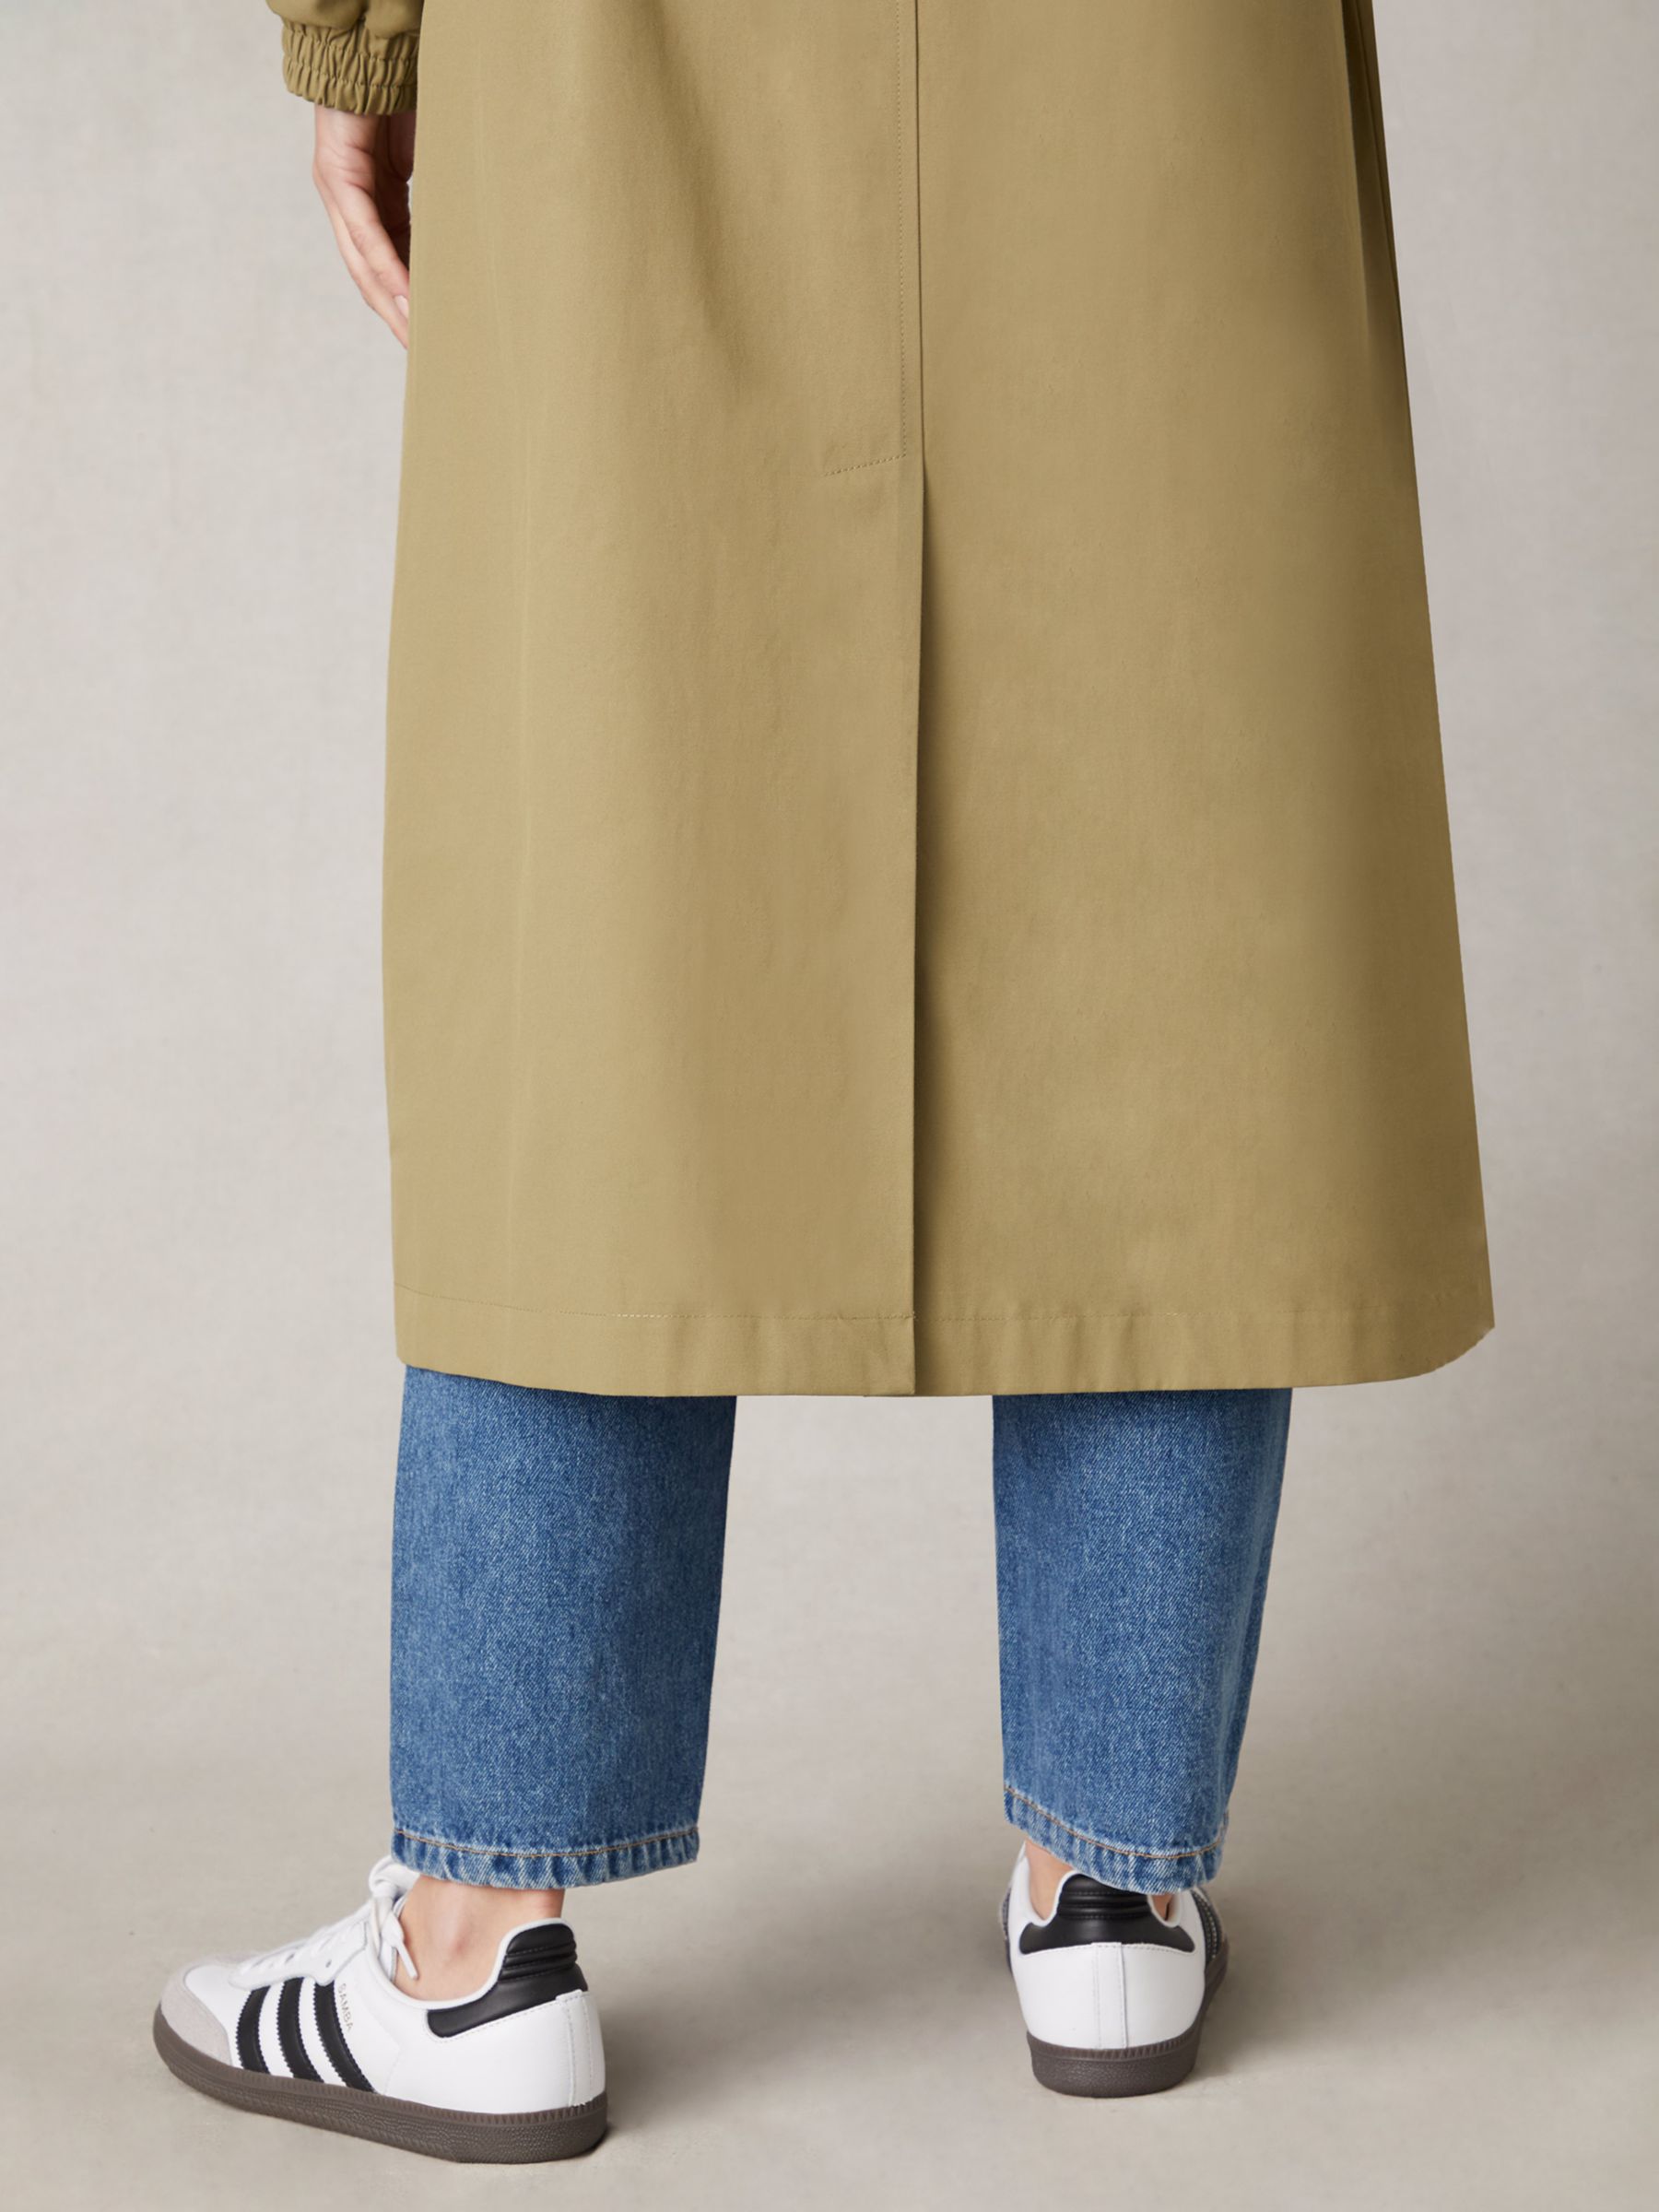 Buy Ro&Zo Olive Belted Trench Coat, Green Online at johnlewis.com